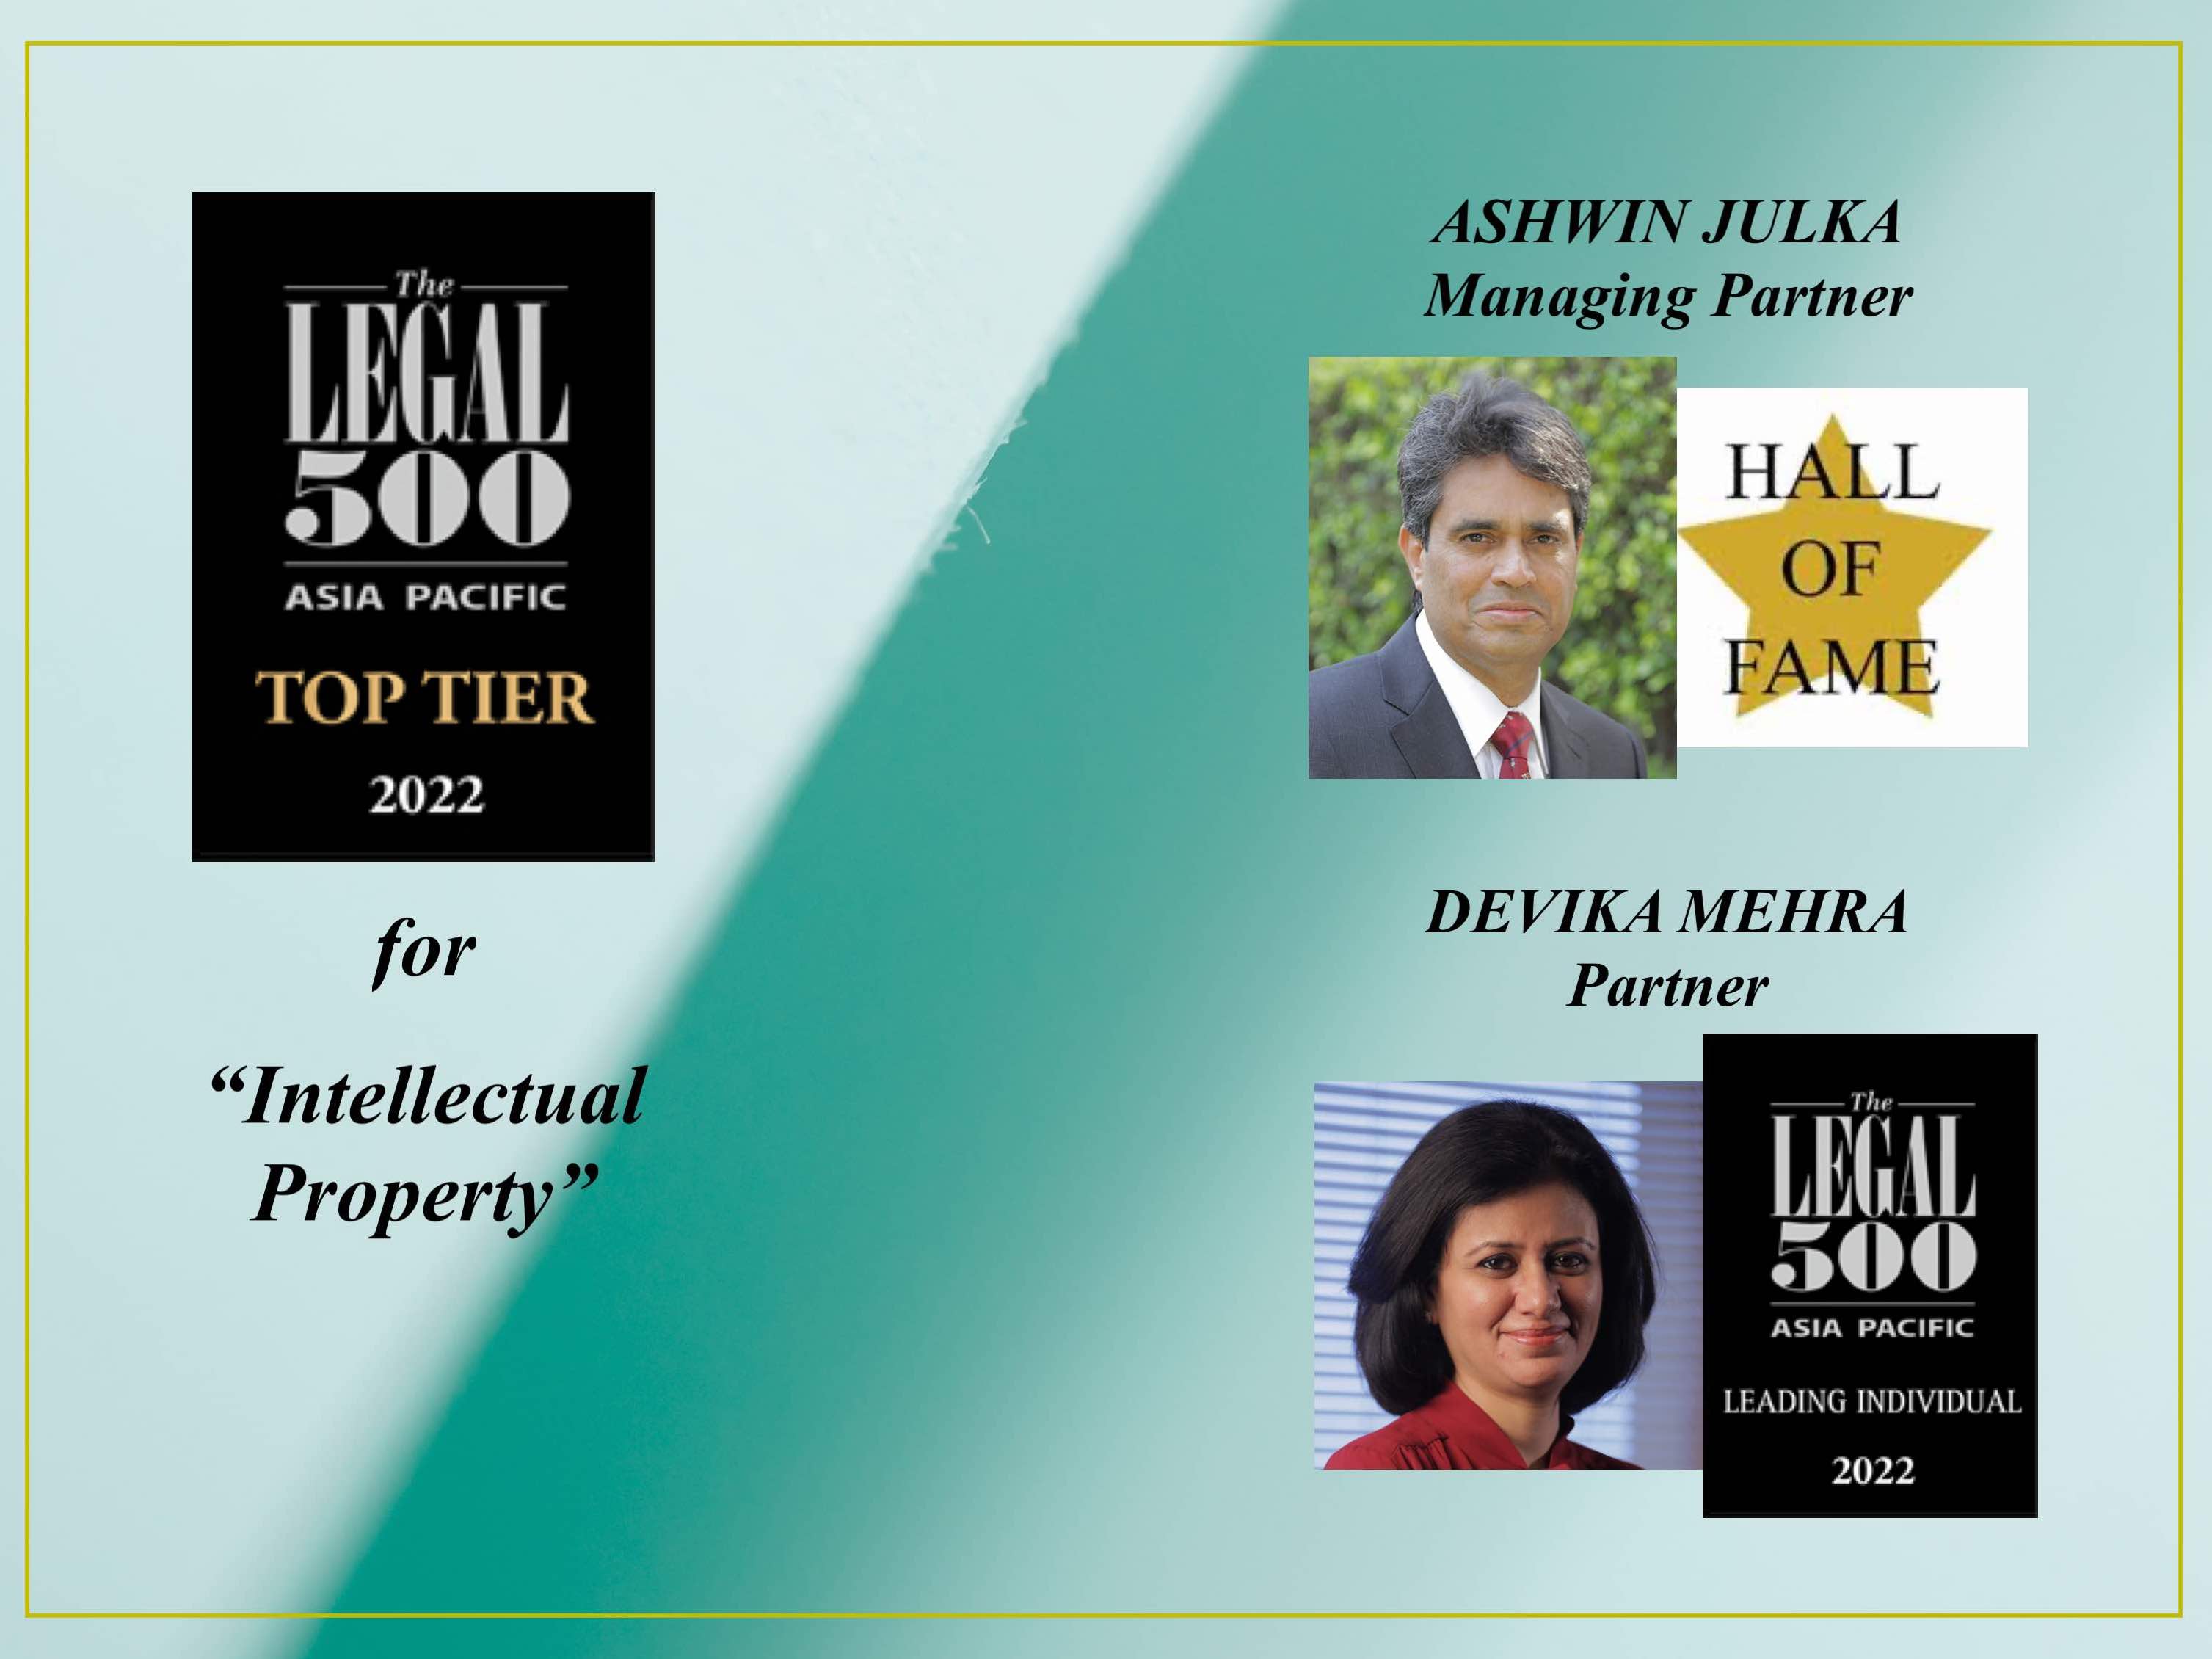 Legal 500 Asia Pacific Rankings 2022